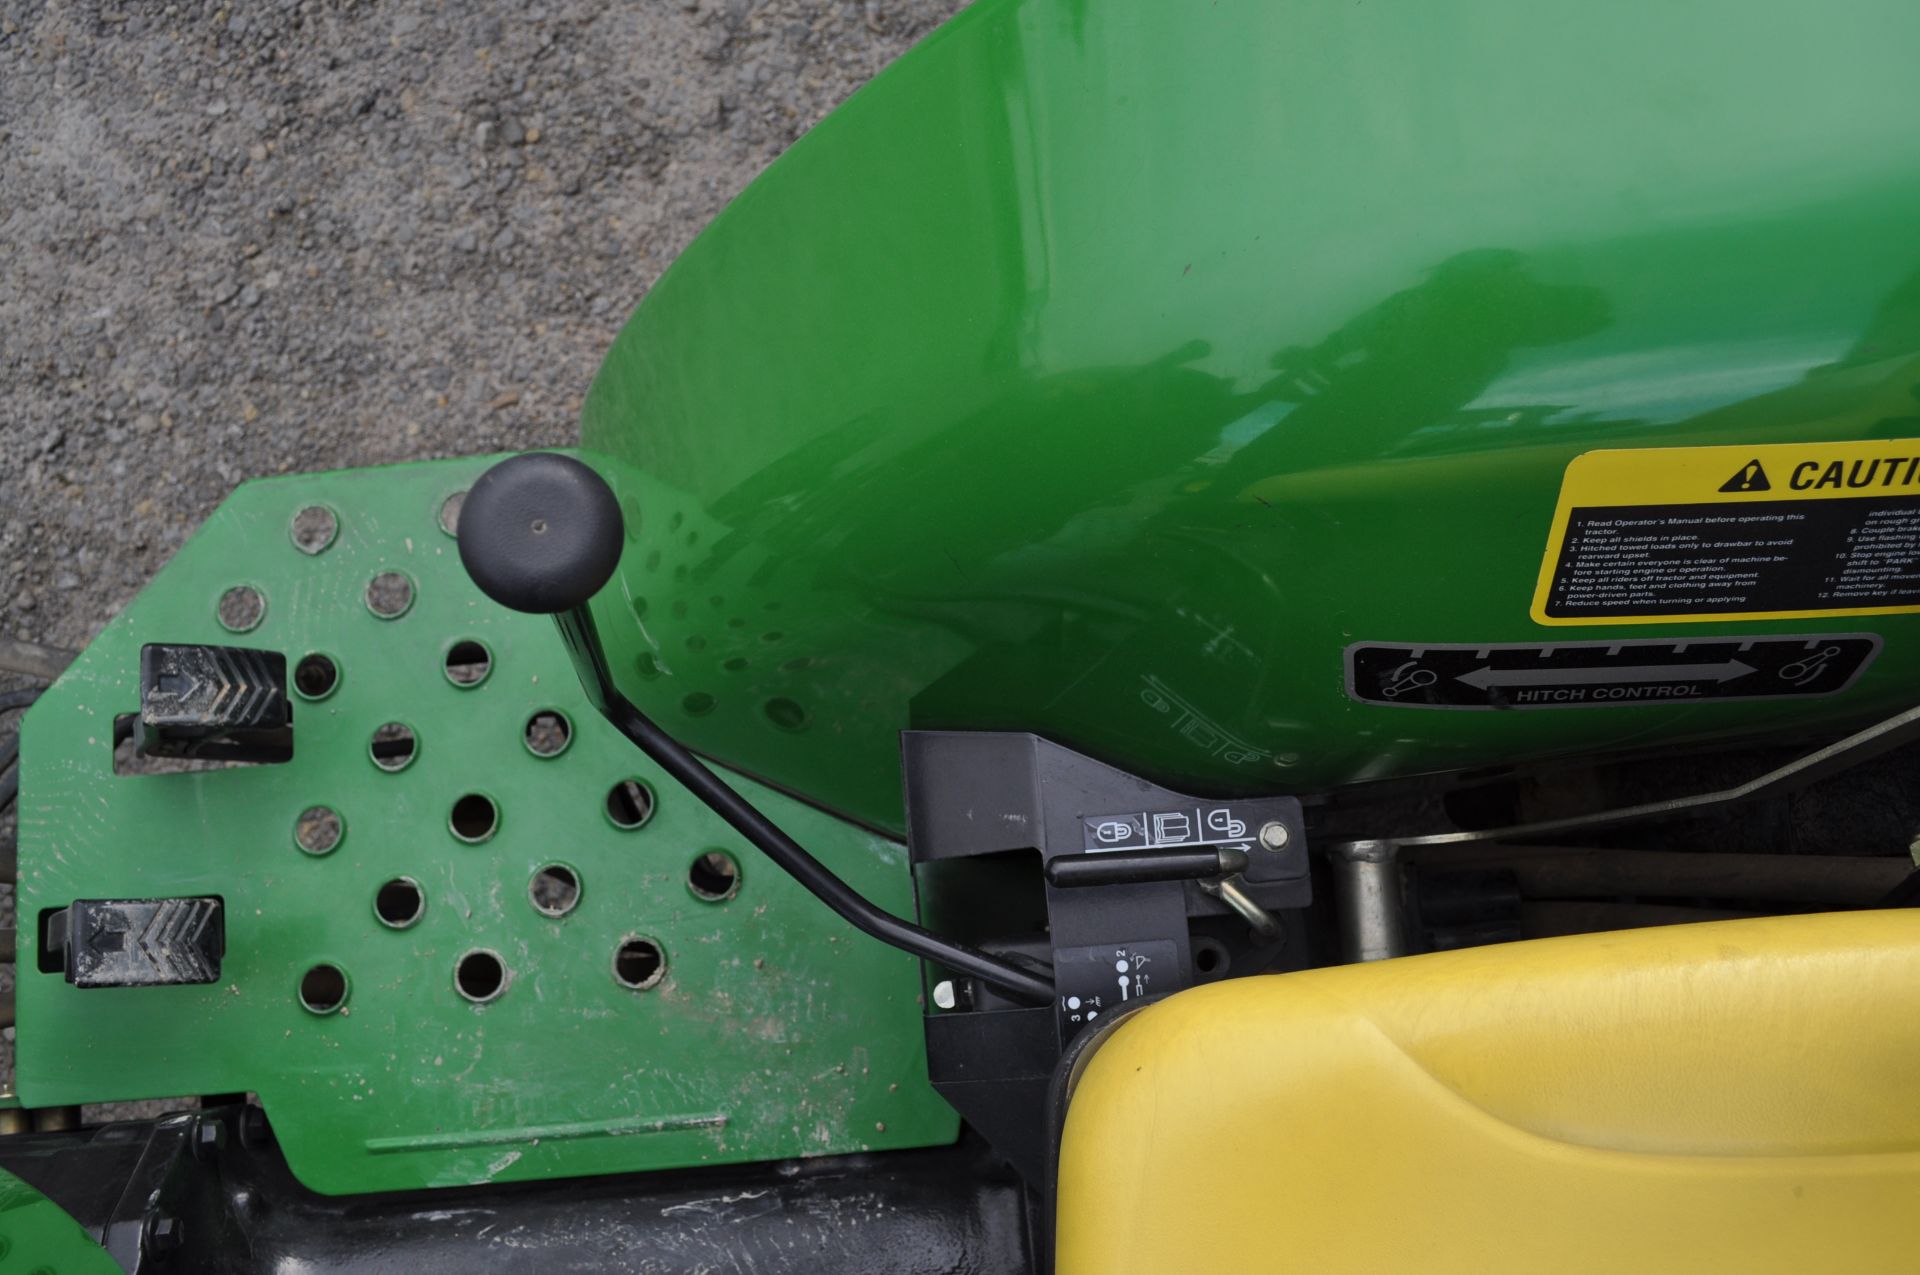 John Deere 3203 compact tractor, 15-19.5 rear, 25 x 8.50-14 front, 4x4 front wts, mid mast hyd - Image 23 of 26